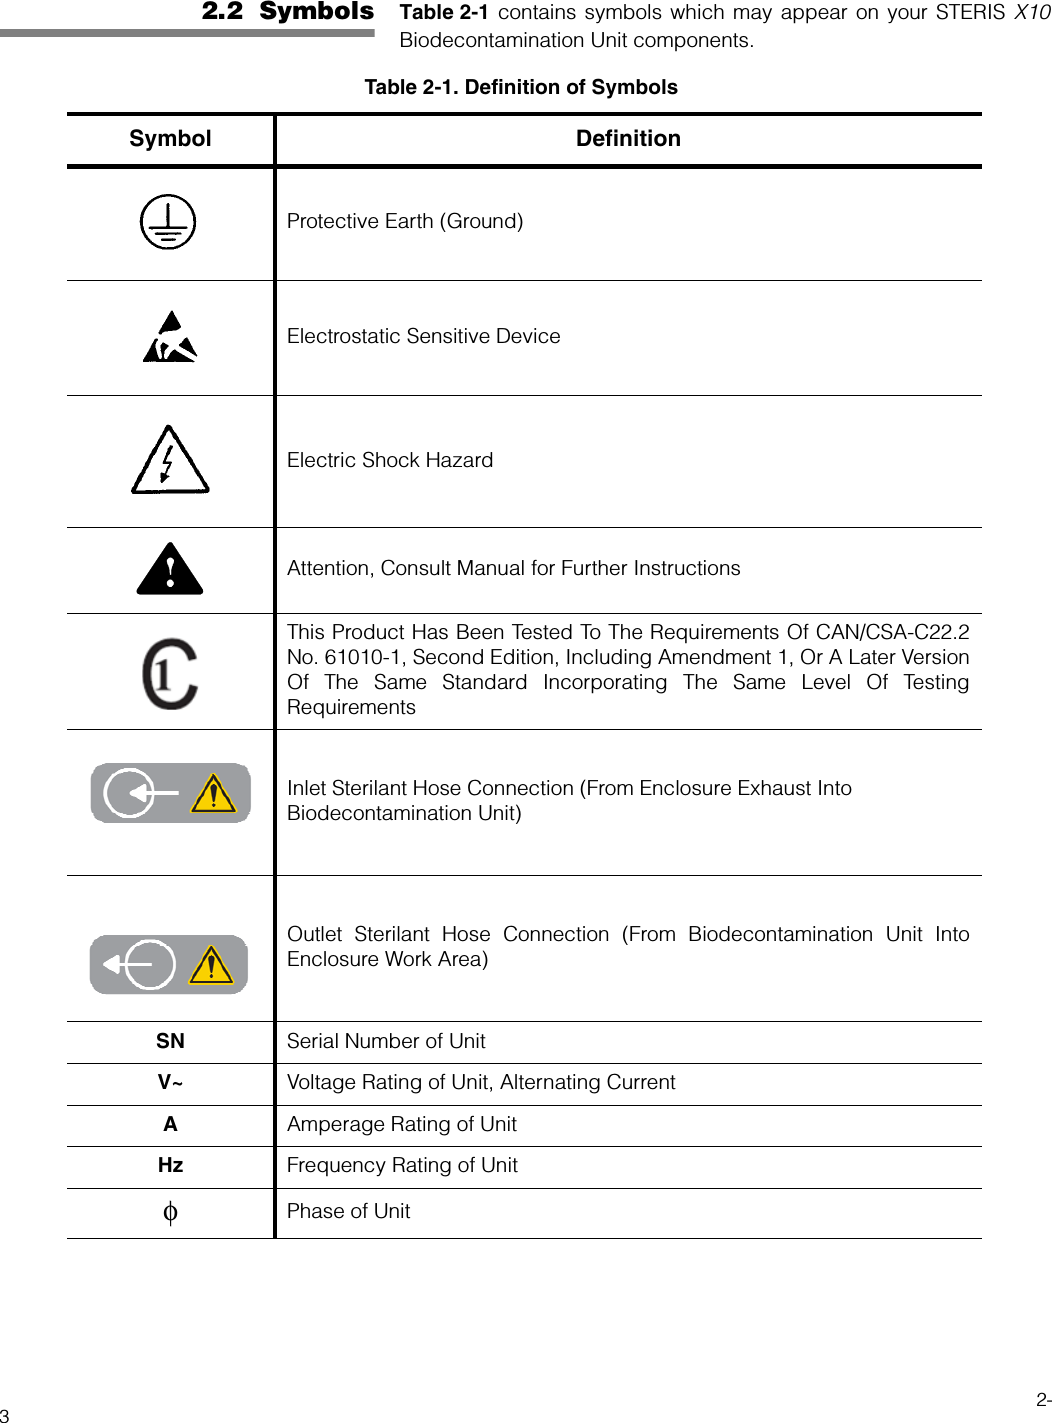 2-32.2  Symbols Table 2-1 contains symbols which may appear on your STERIS X10Biodecontamination Unit components.    Table 2-1. Definition of SymbolsSymbol DefinitionProtective Earth (Ground)Electrostatic Sensitive DeviceElectric Shock HazardAttention, Consult Manual for Further InstructionsThis Product Has Been Tested To The Requirements Of CAN/CSA-C22.2No. 61010-1, Second Edition, Including Amendment 1, Or A Later VersionOf The Same Standard Incorporating The Same Level Of TestingRequirementsInlet Sterilant Hose Connection (From Enclosure Exhaust Into Biodecontamination Unit)Outlet Sterilant Hose Connection (From Biodecontamination Unit IntoEnclosure Work Area)SN Serial Number of UnitV~ Voltage Rating of Unit, Alternating CurrentAAmperage Rating of UnitHz Frequency Rating of UnitφPhase of Unit